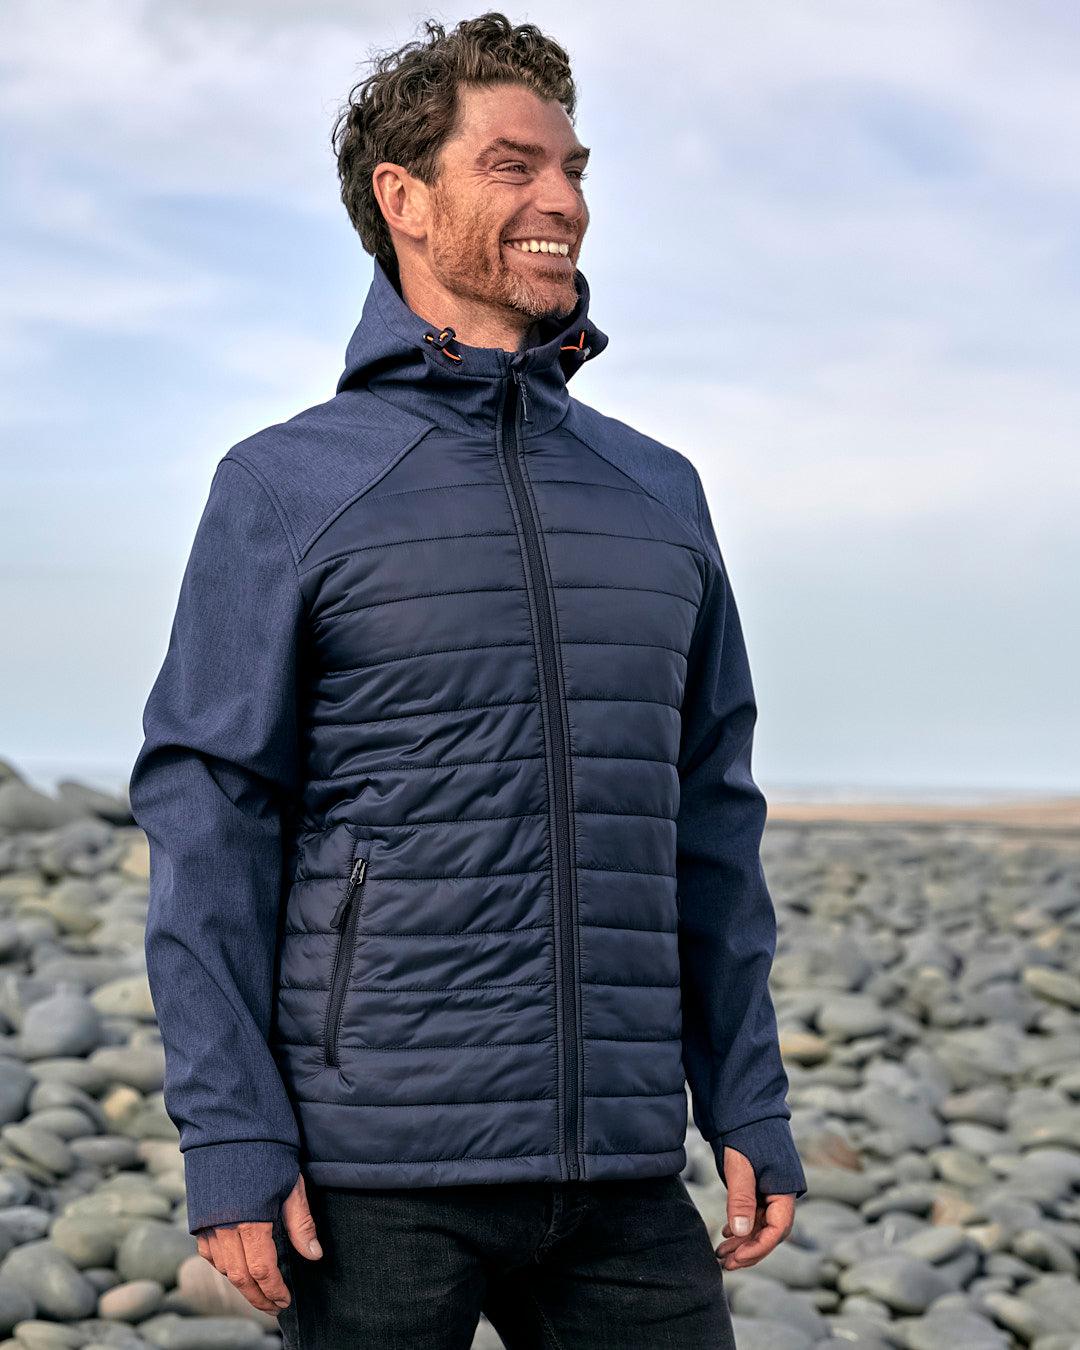 A man in a Saltrock Purbeck Padded Jacket - Dark Blue standing on a rocky beach.